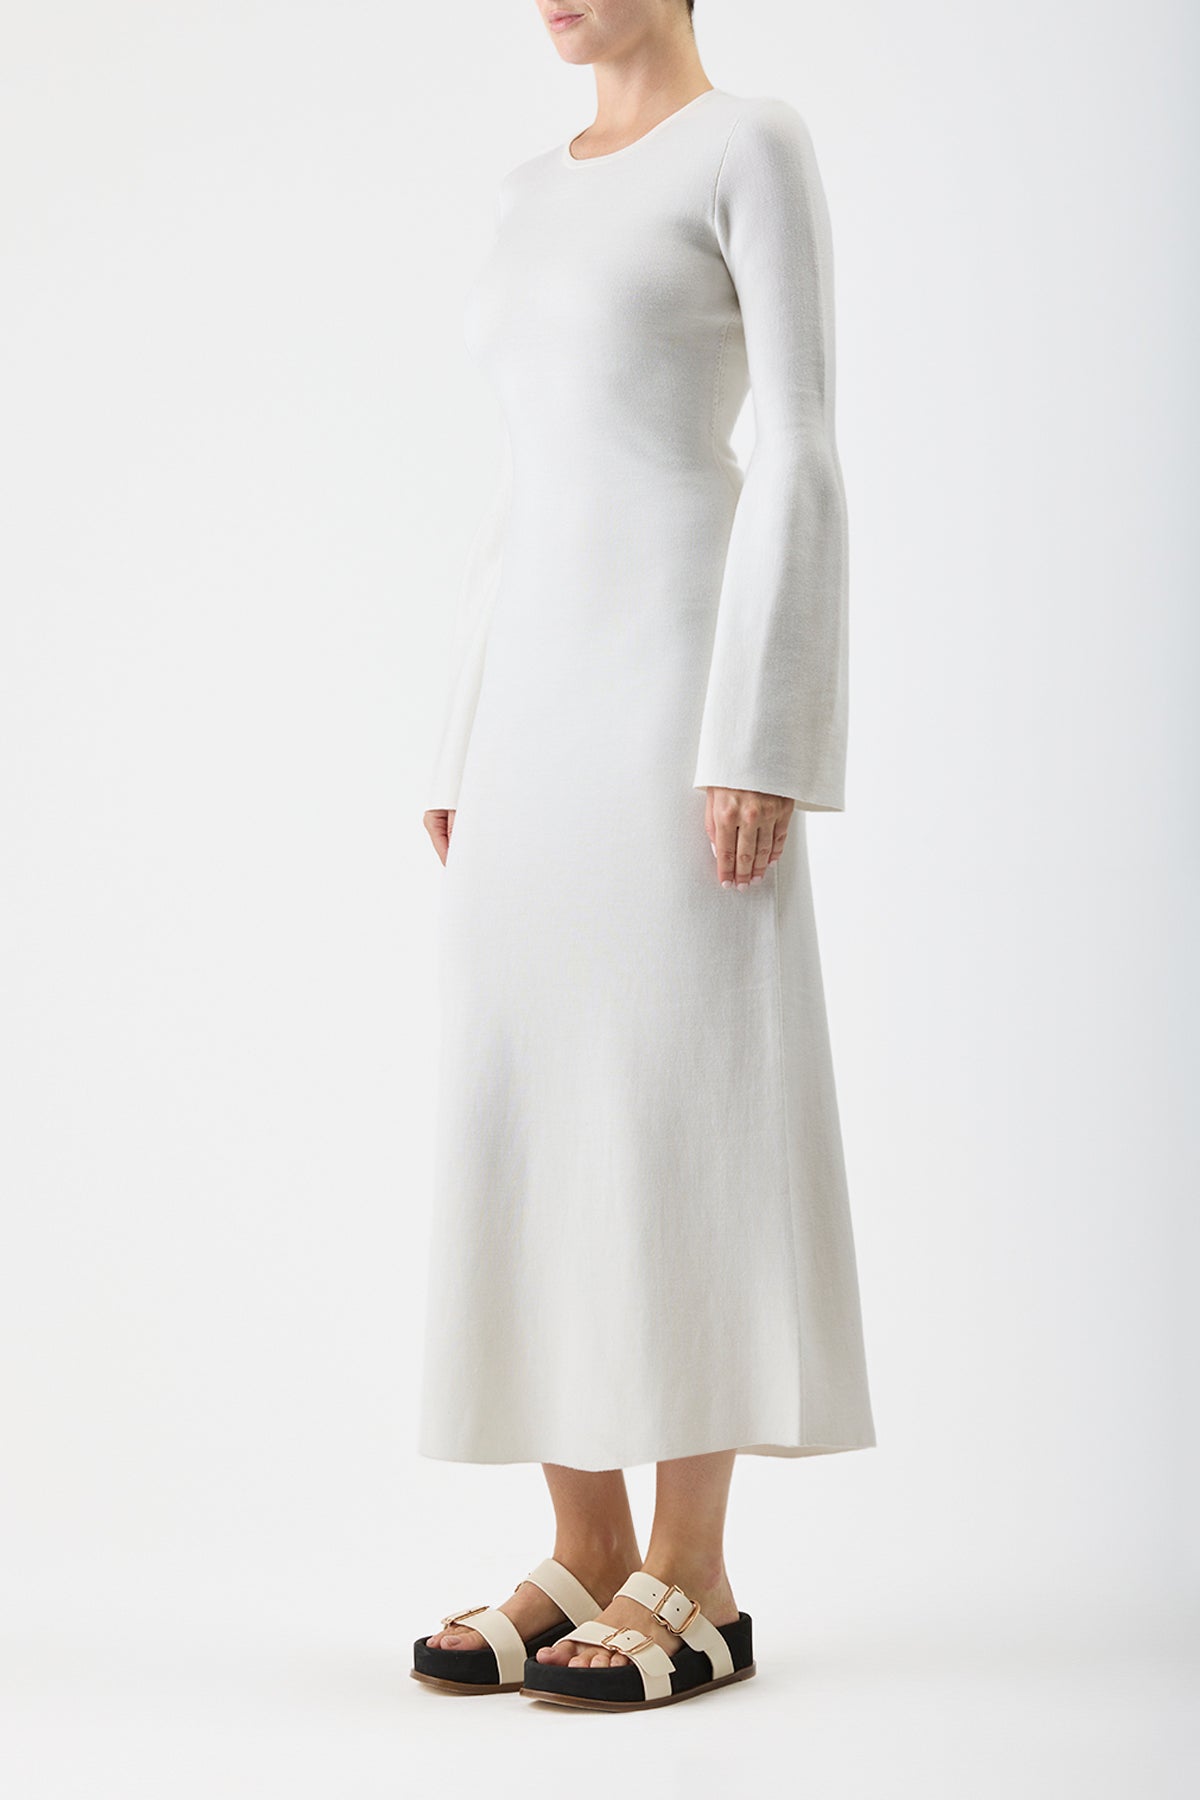 Palanco Knit Dress in Cashmere Wool